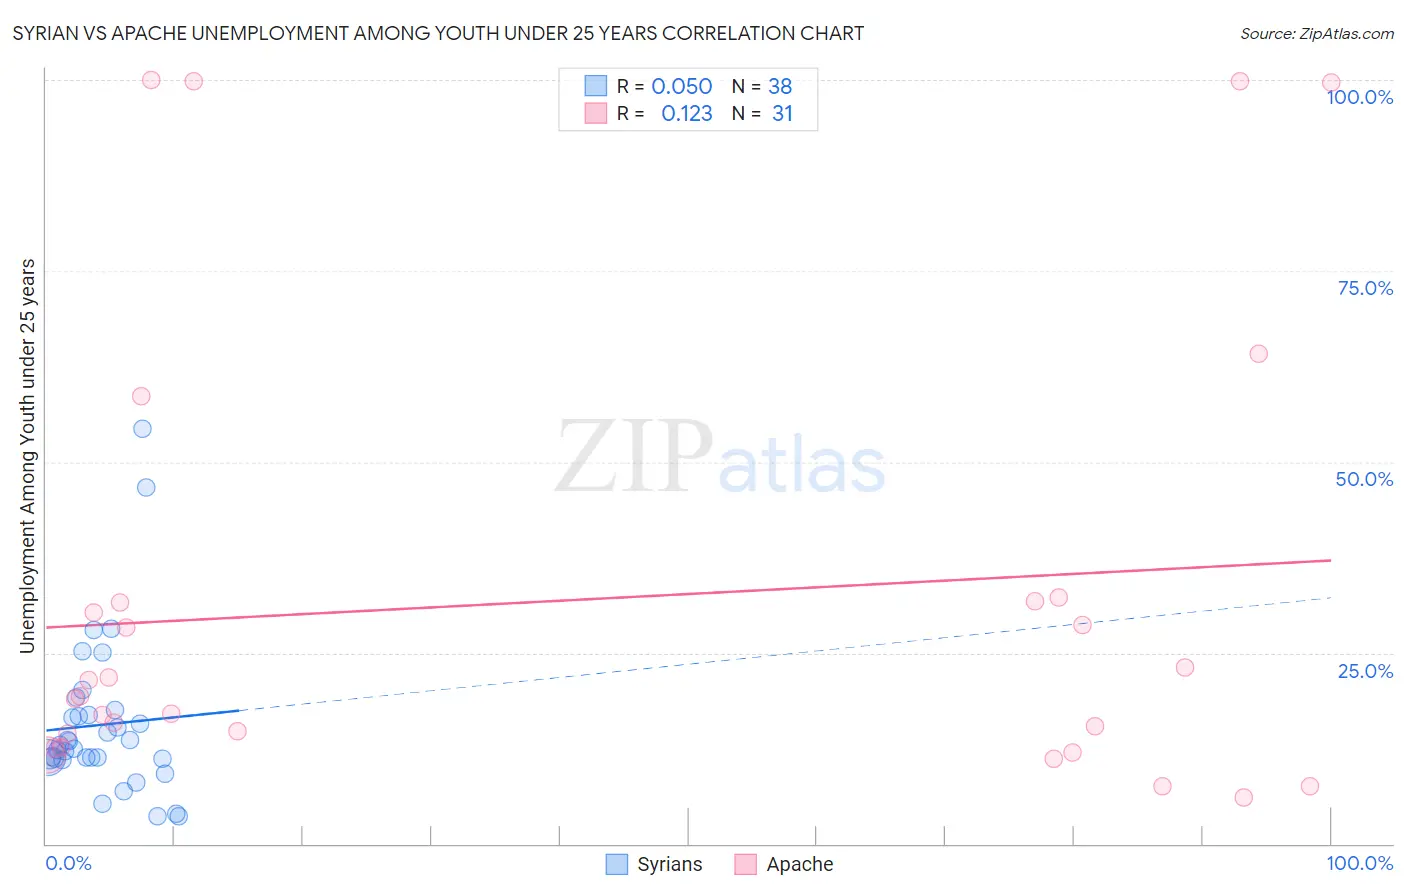 Syrian vs Apache Unemployment Among Youth under 25 years